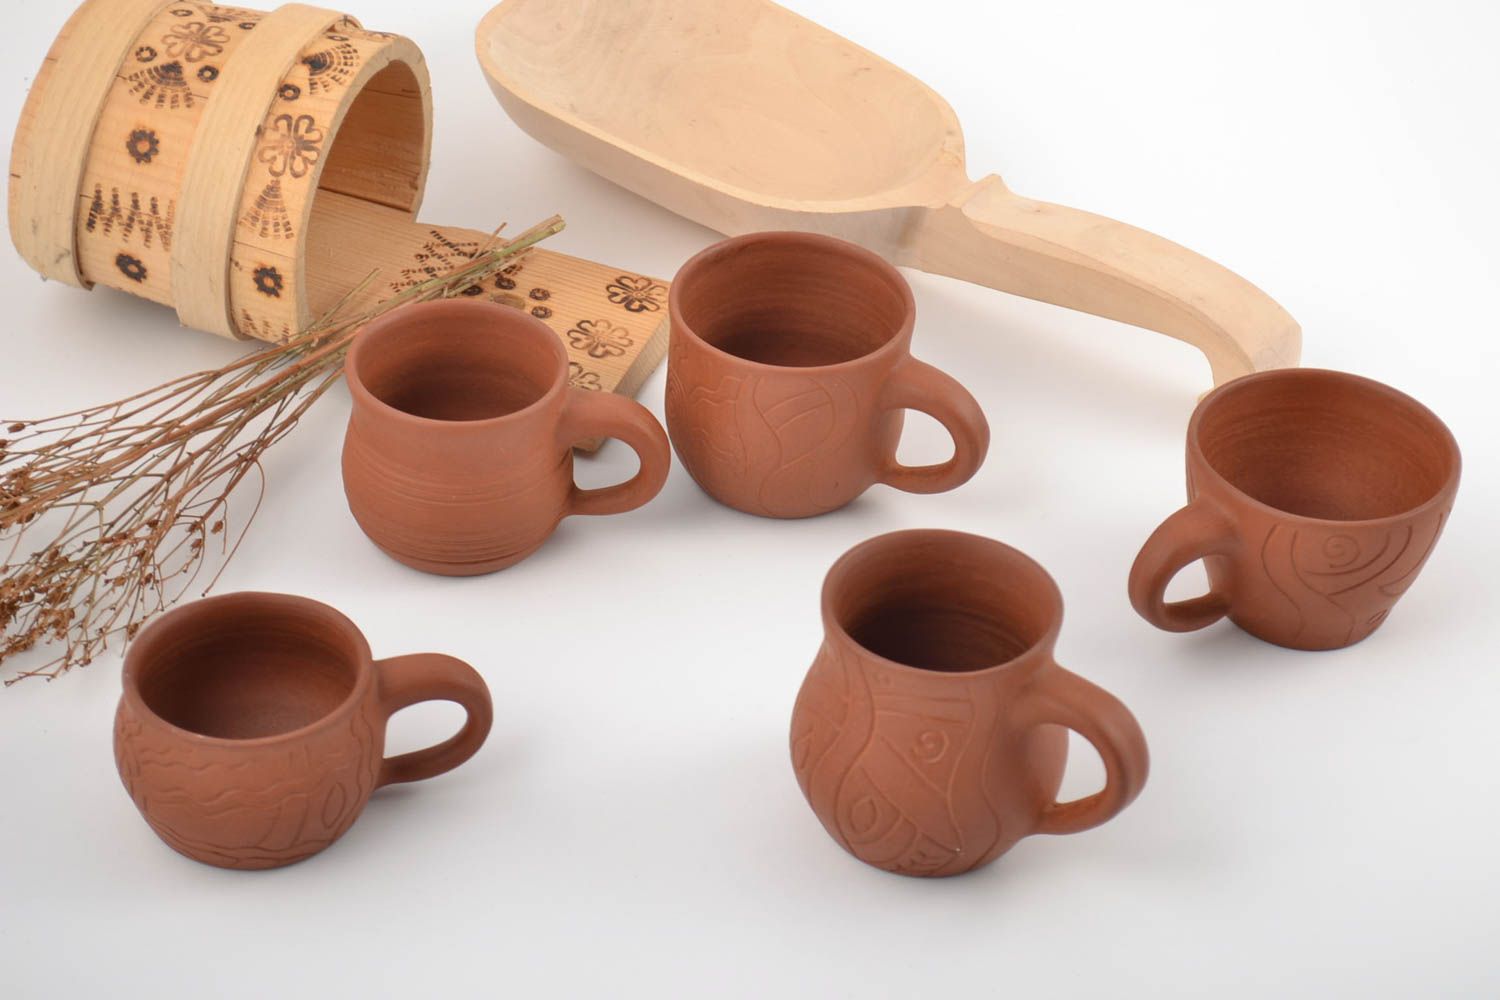 Set of 5 absolutely different terracotta color ceramic coffee mugs 3 oz each photo 1